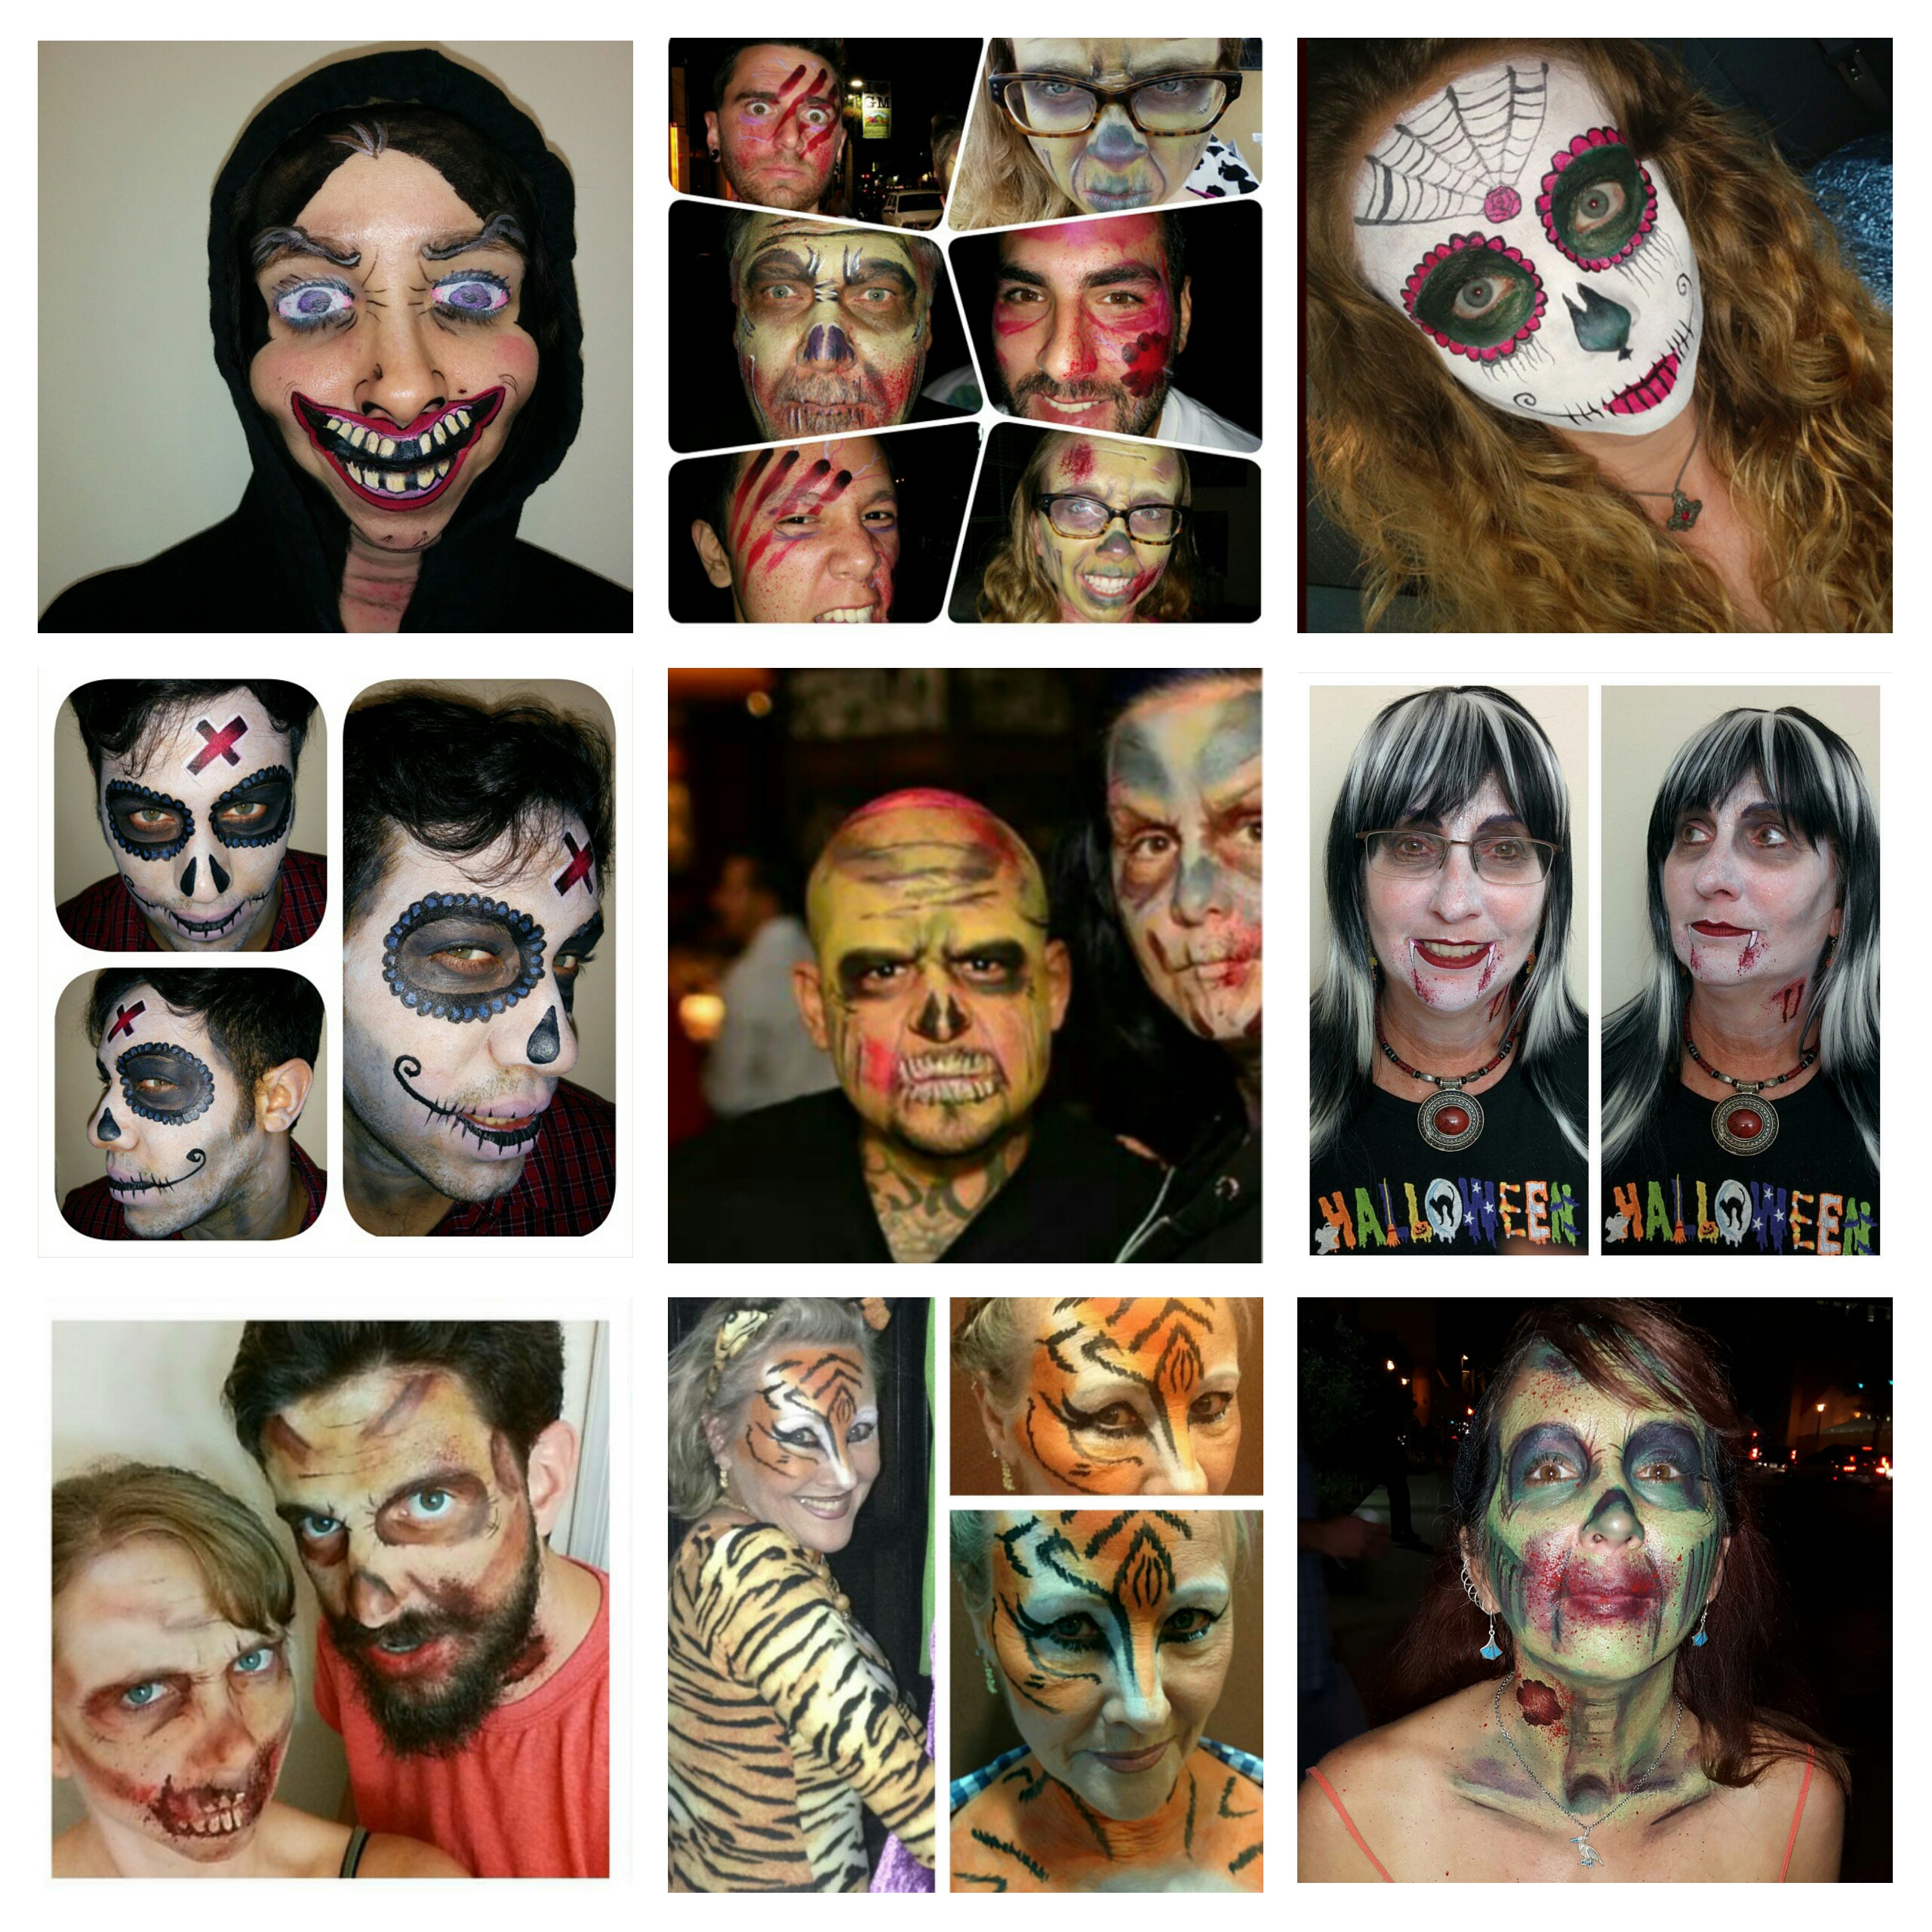 Book us for private appointments and for Halloween costume enhancements!